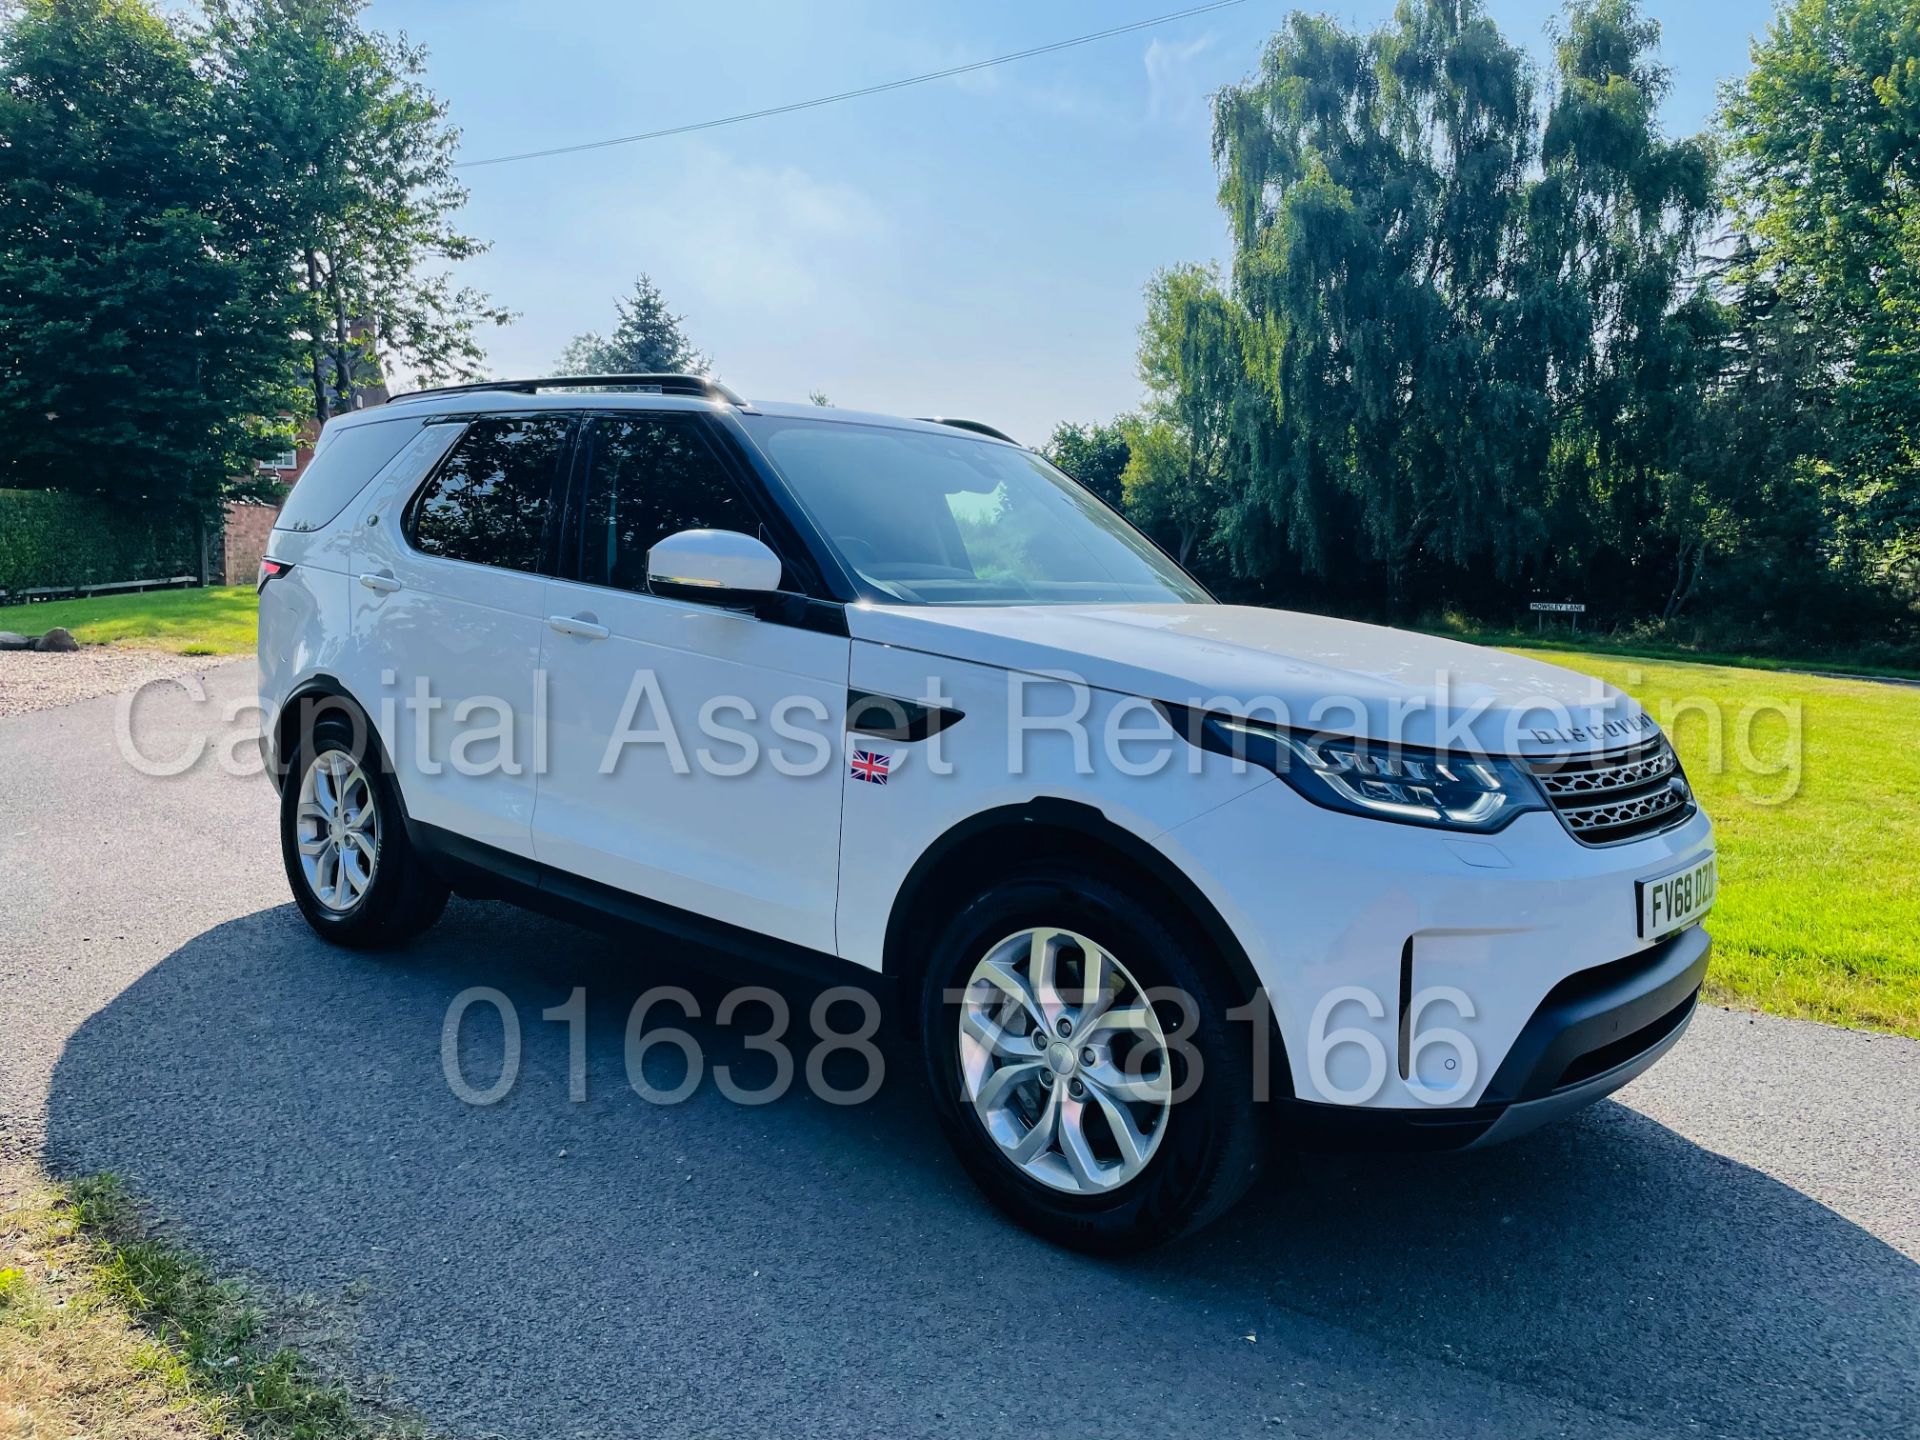 LAND ROVER DISCOVERY 5 *SE EDITION* SUV (2019 - EURO 6) '3.0 TD6 -306 BHP- 8 SPEED AUTO' *HUGE SPEC* - Image 2 of 47